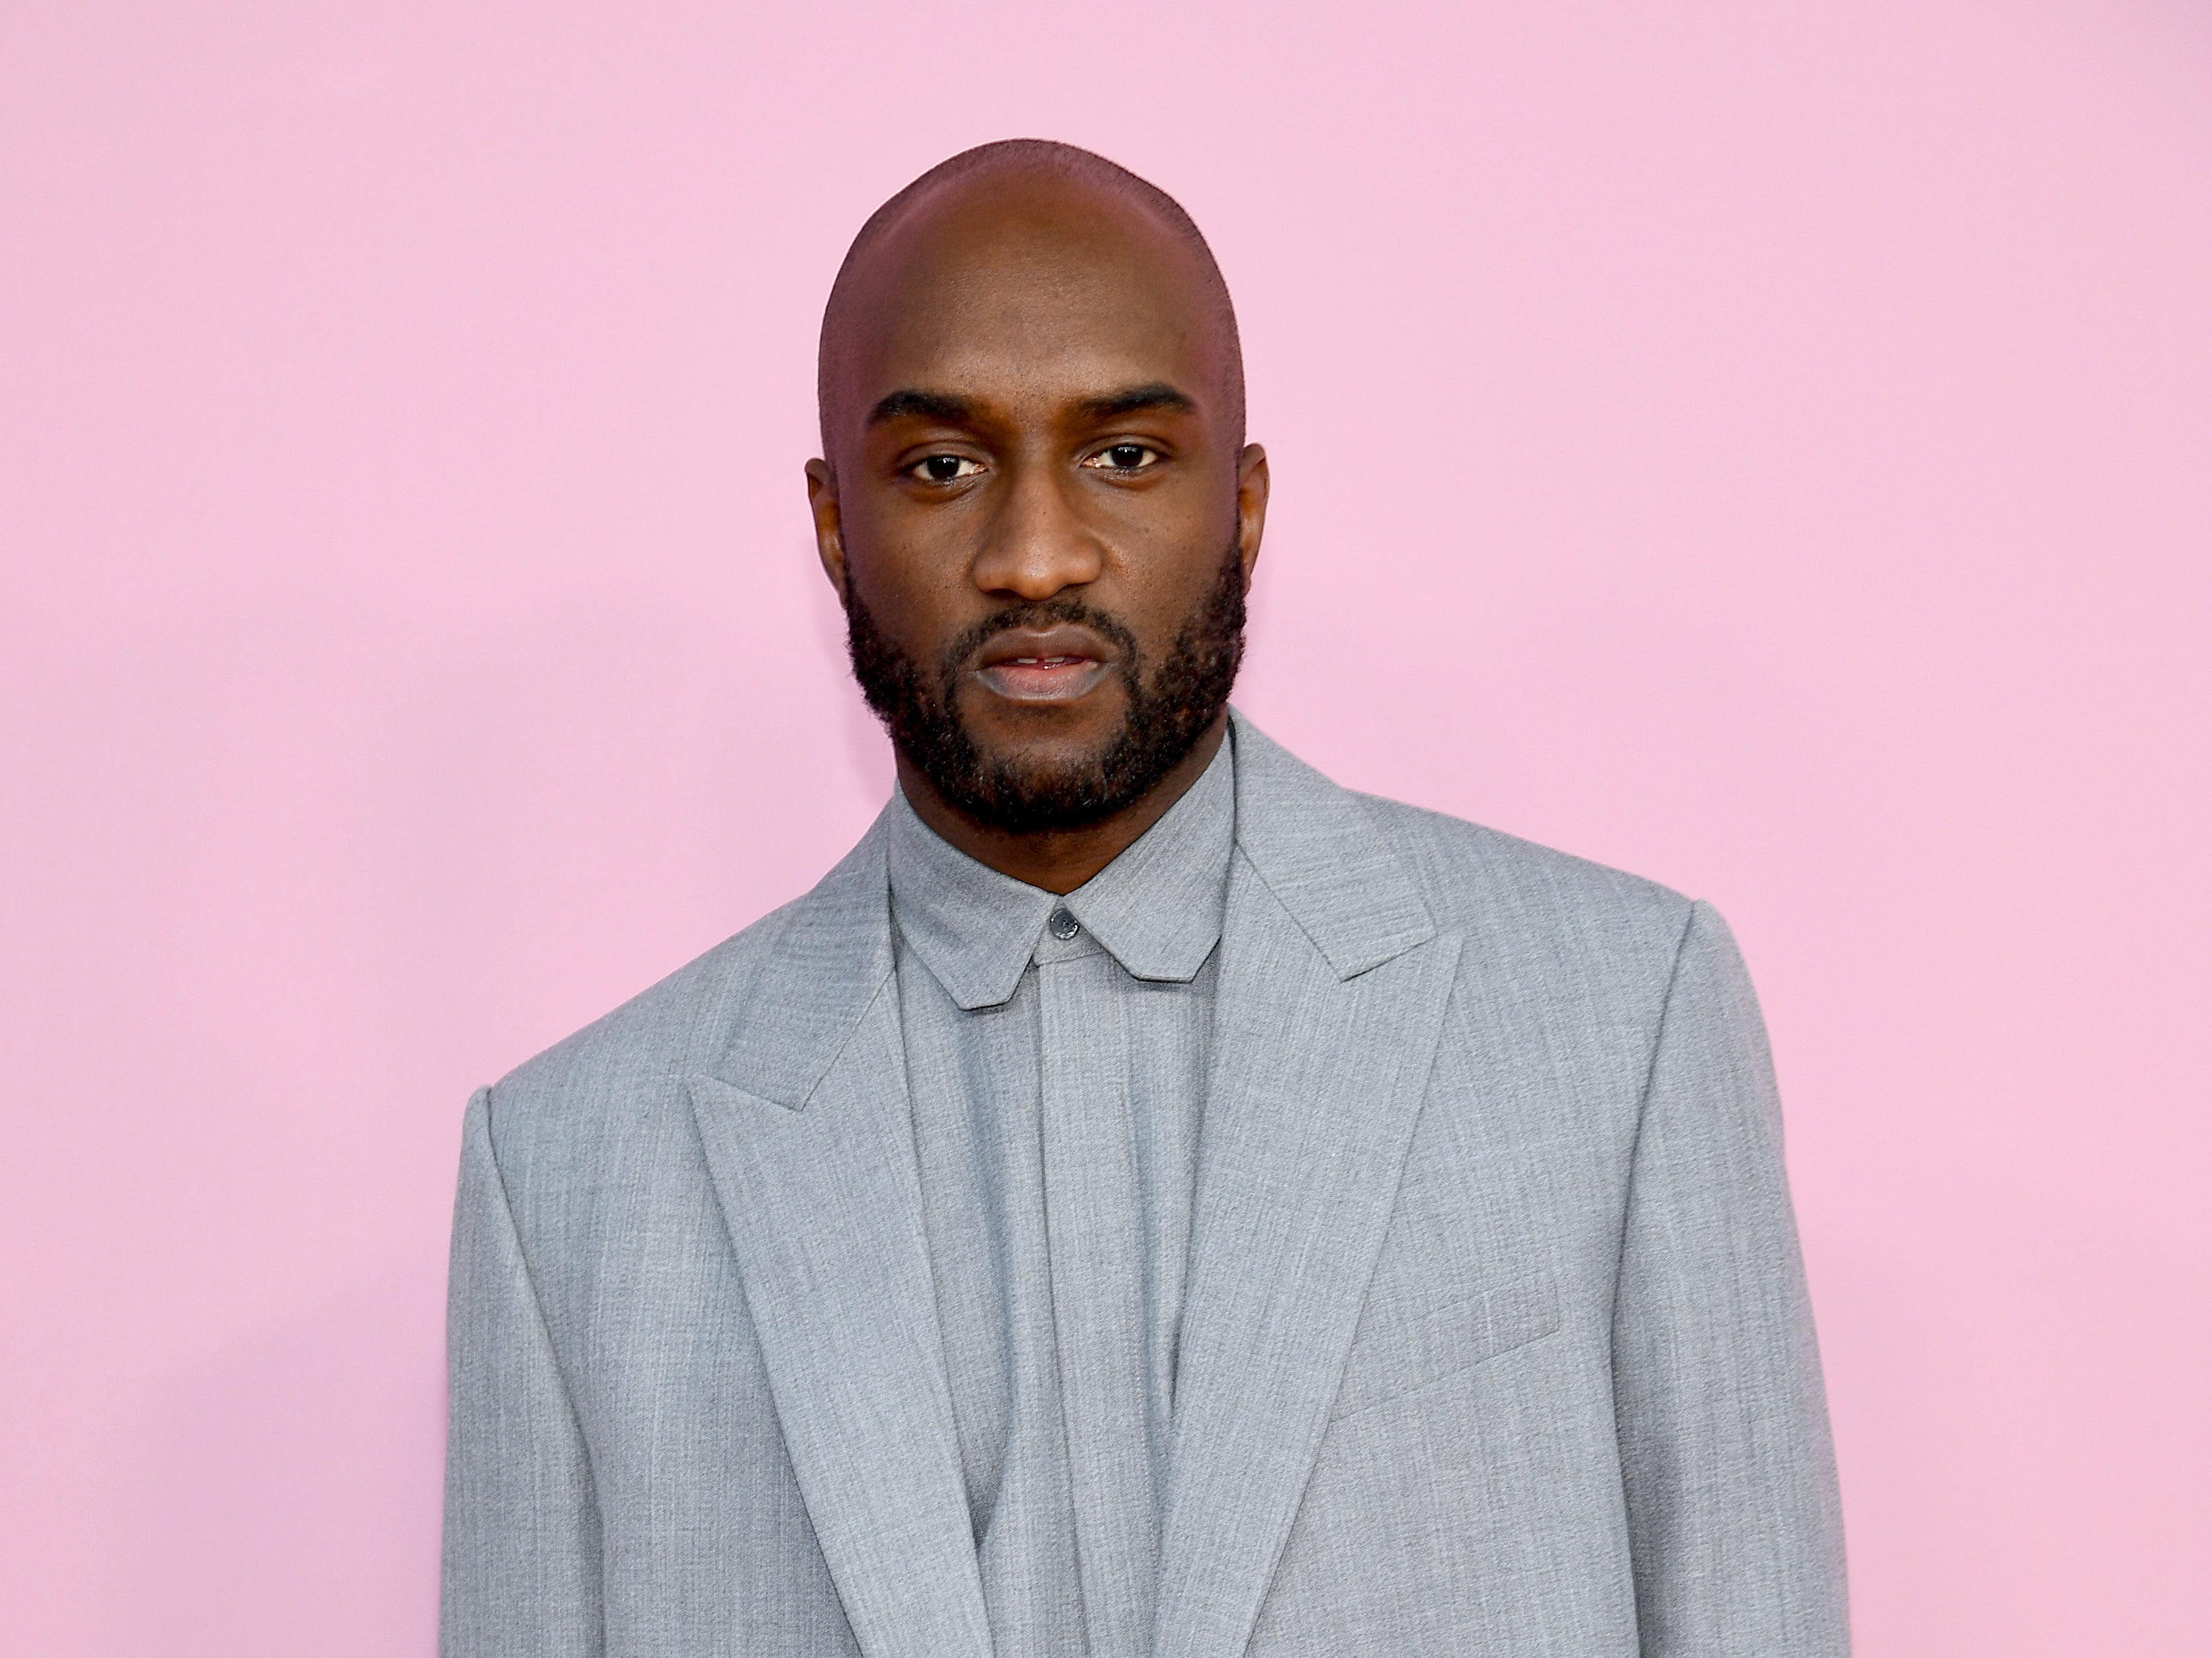 Virgil Abloh death: Fashion industry pays tribute